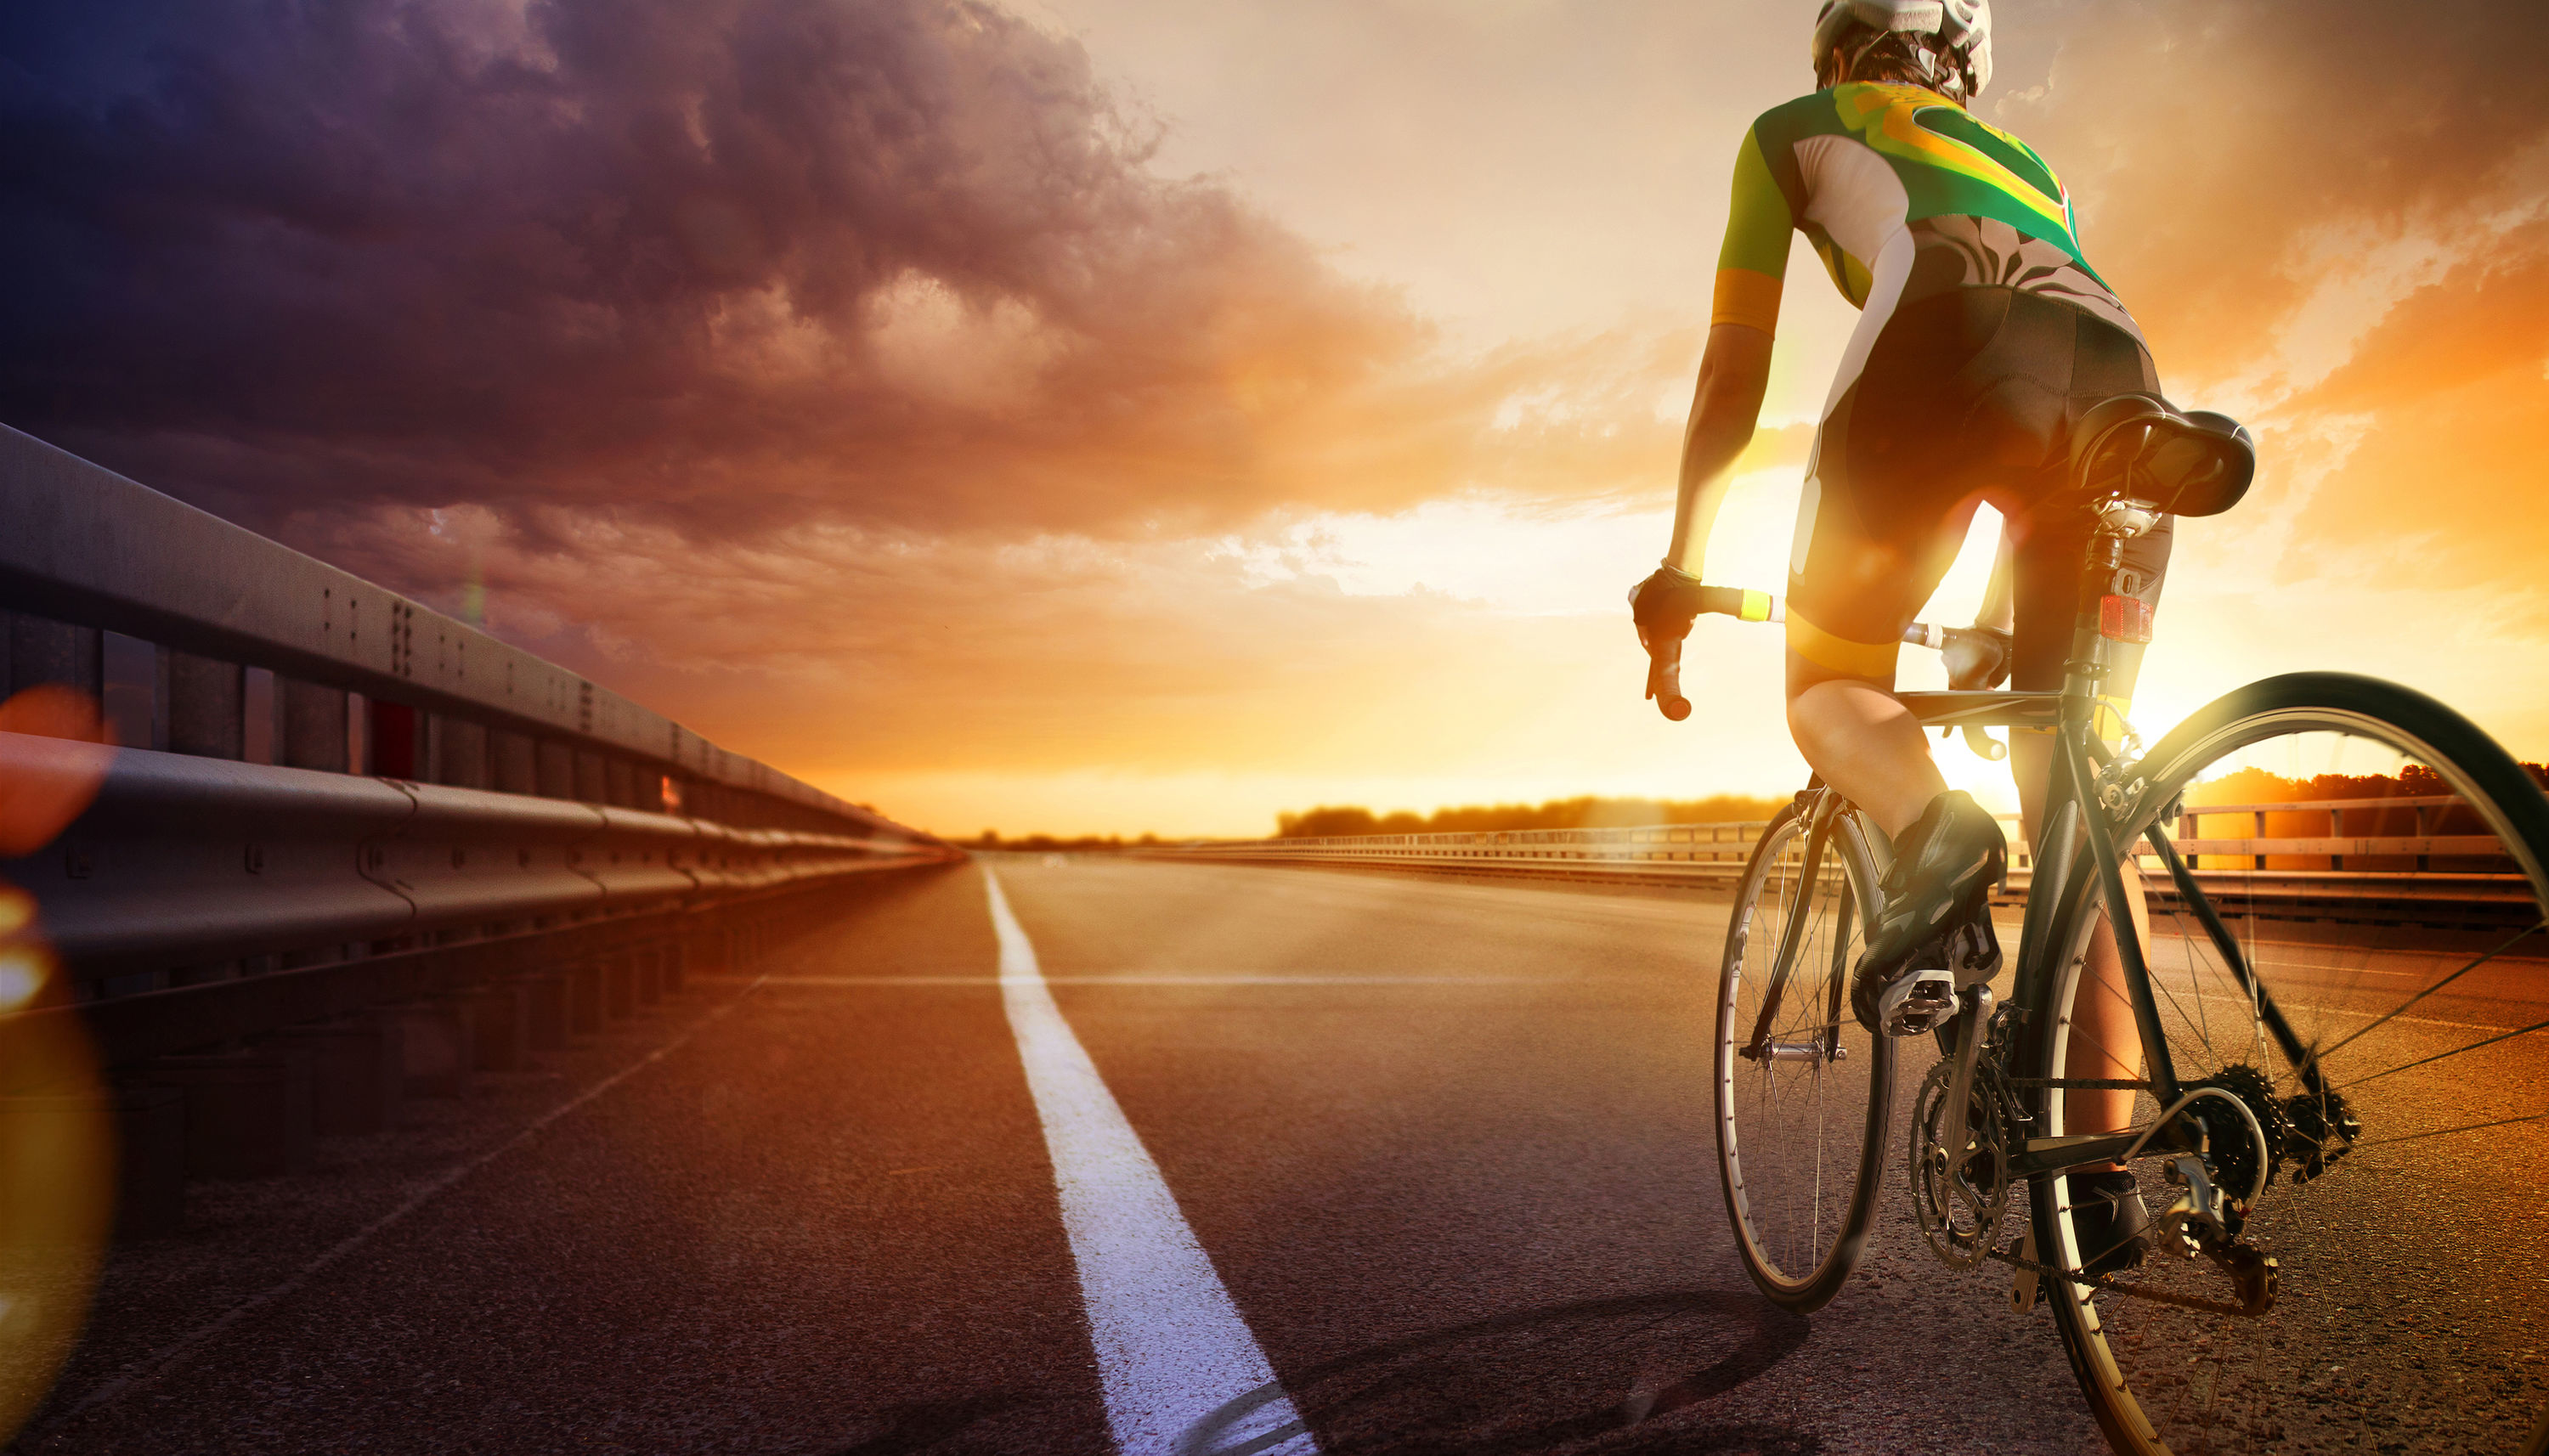 2020-09/cycling-shutterstock-large